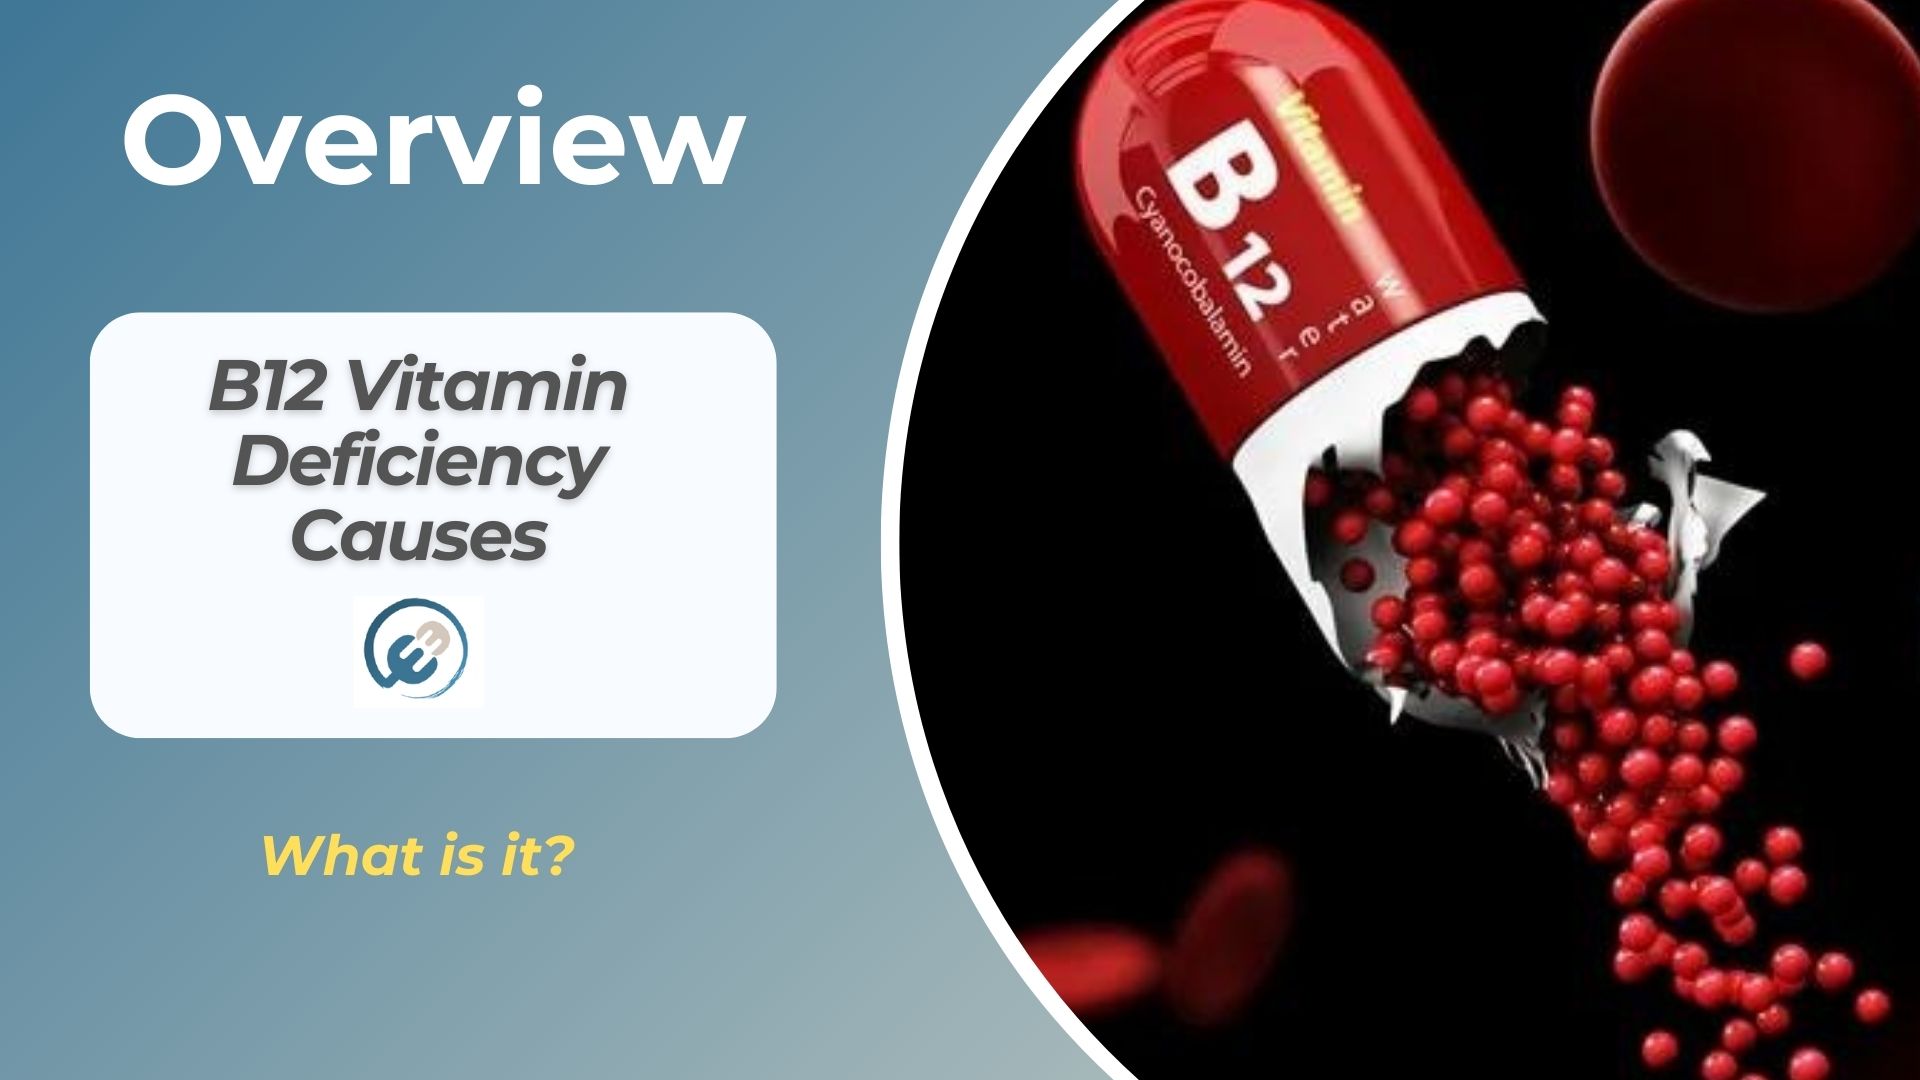 B12 Vitamin Deficiency Causes What is it